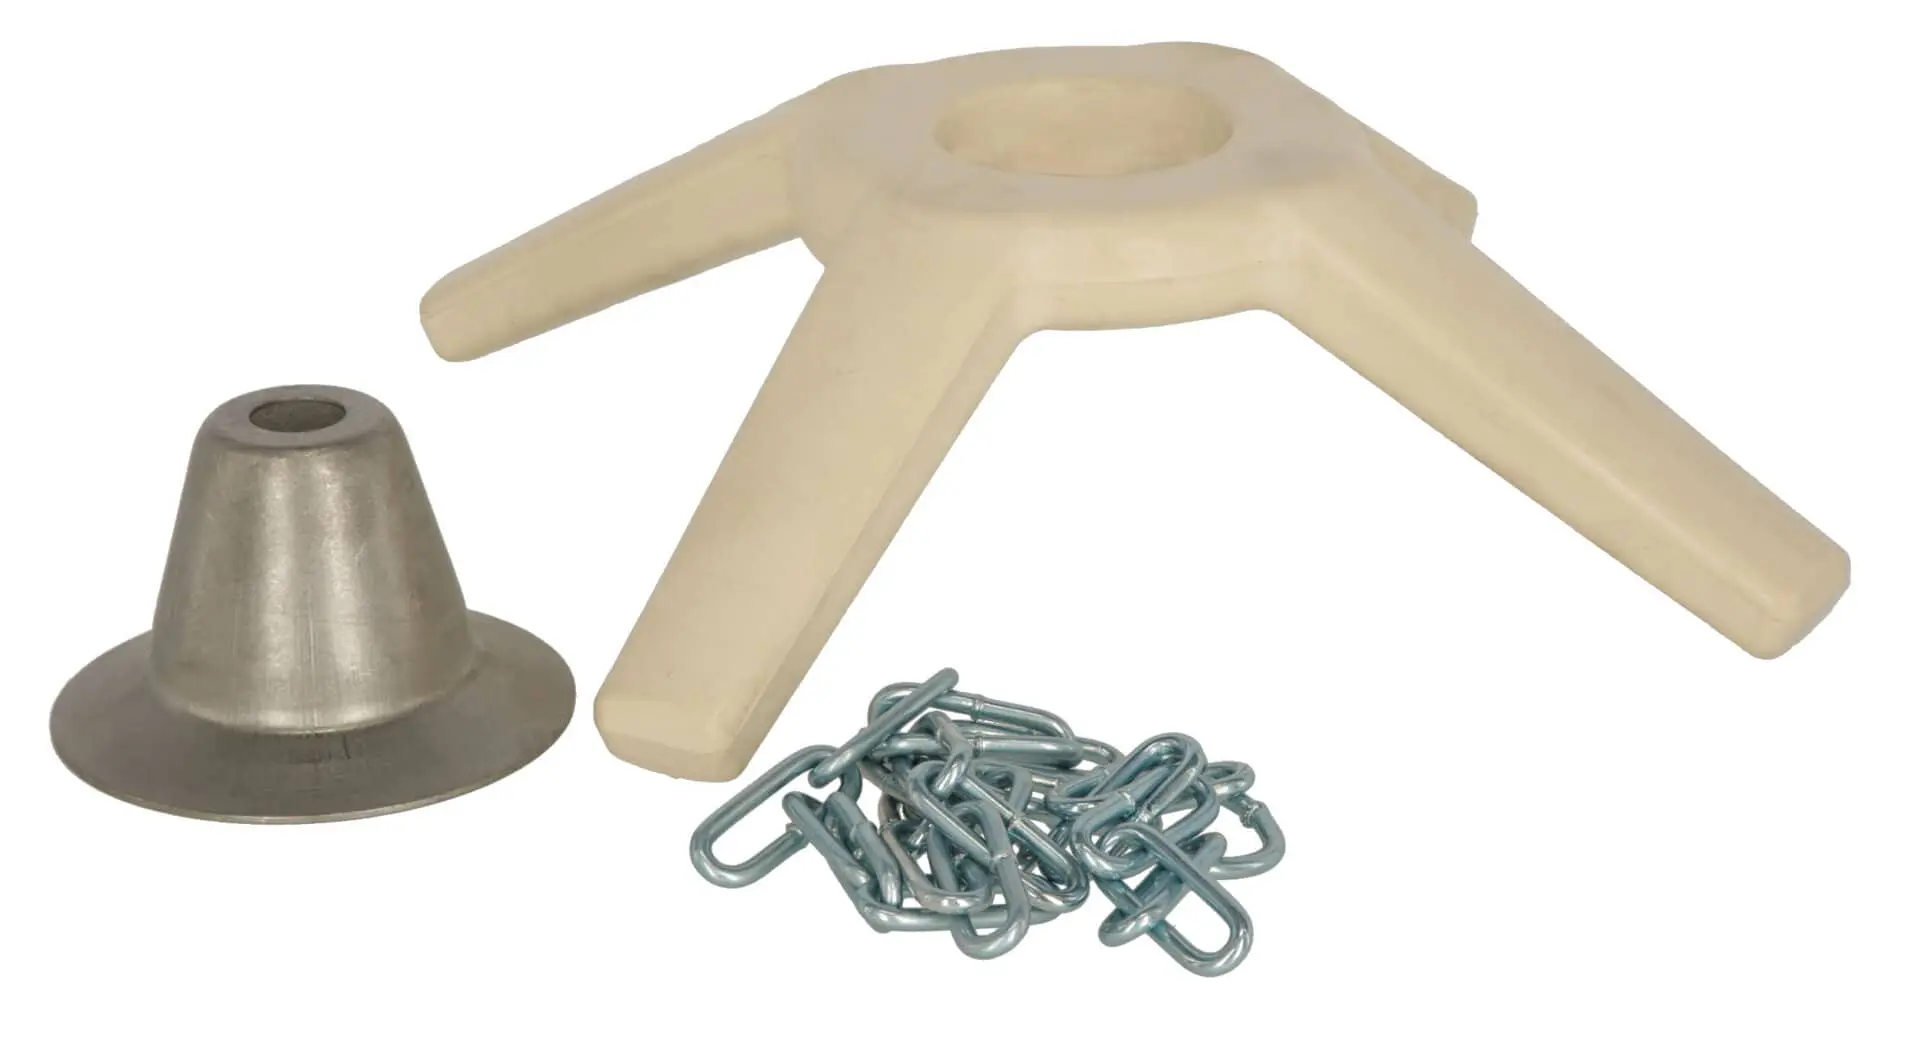 Pig Toy BiteStar with Eyelet End Cap and Chain